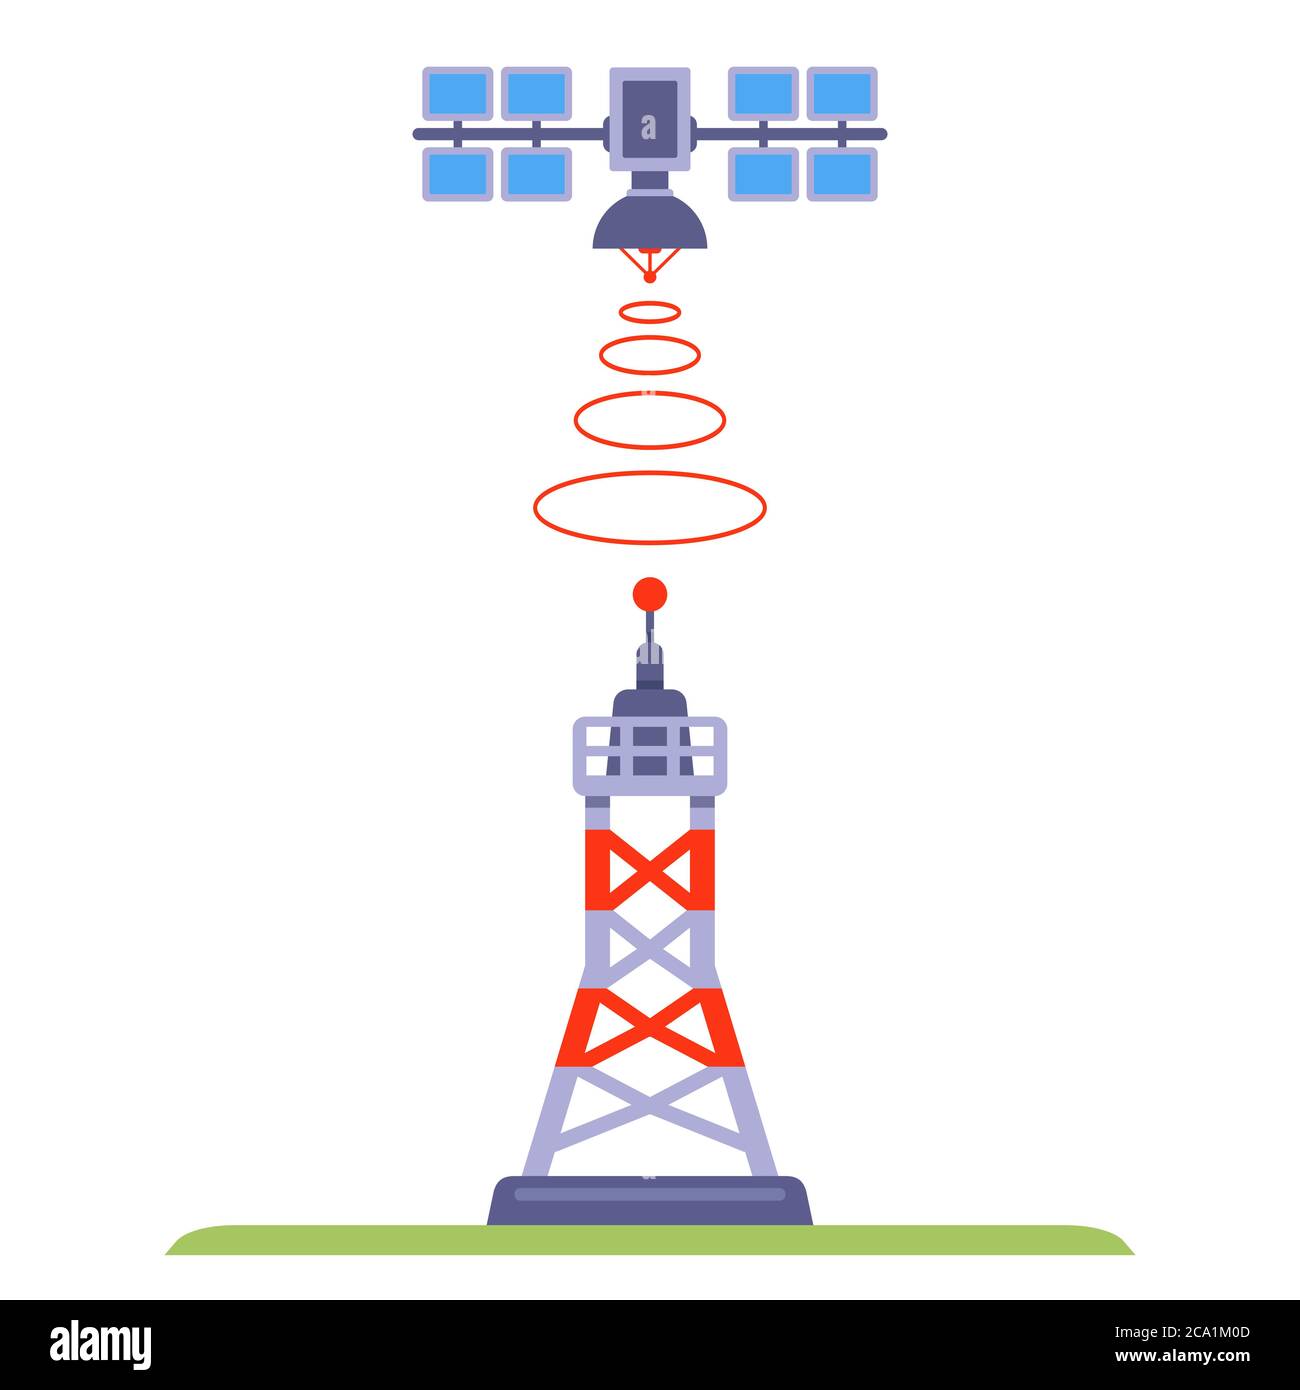 satellite signal transmitting to the antenna. global internet through space. Flat vector illustration isolated on white background. Stock Vector